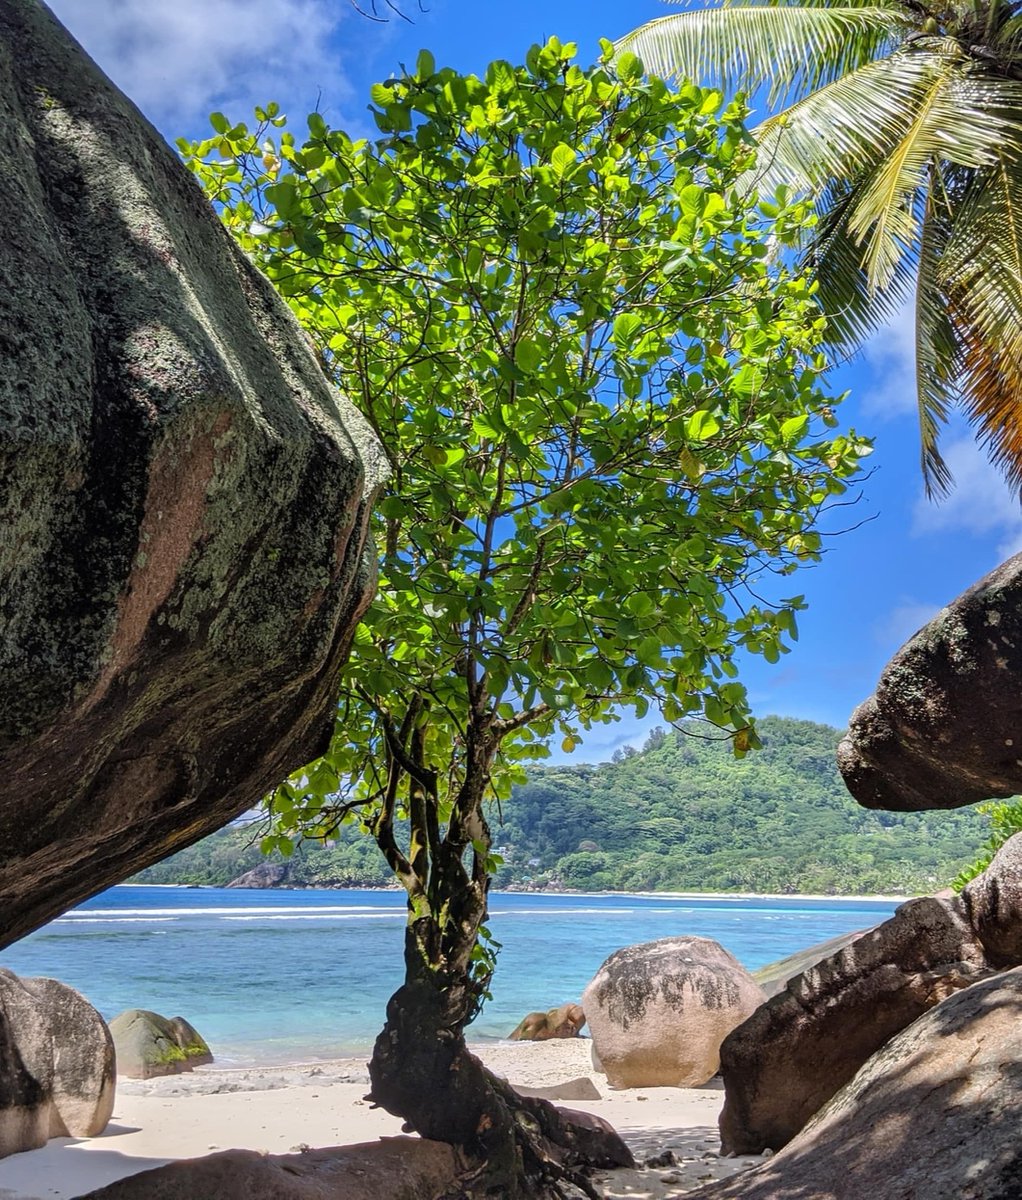 Destination....Seychelles

Sweeping beaches of sugar-fine sand, crystal-clear cerulean shores, gourmet dining on private beaches, it’s reasonable to expect that the Seychelles will give you total wish-you-were-here vibes. 

#Seychelles #Travel #TravelGuide